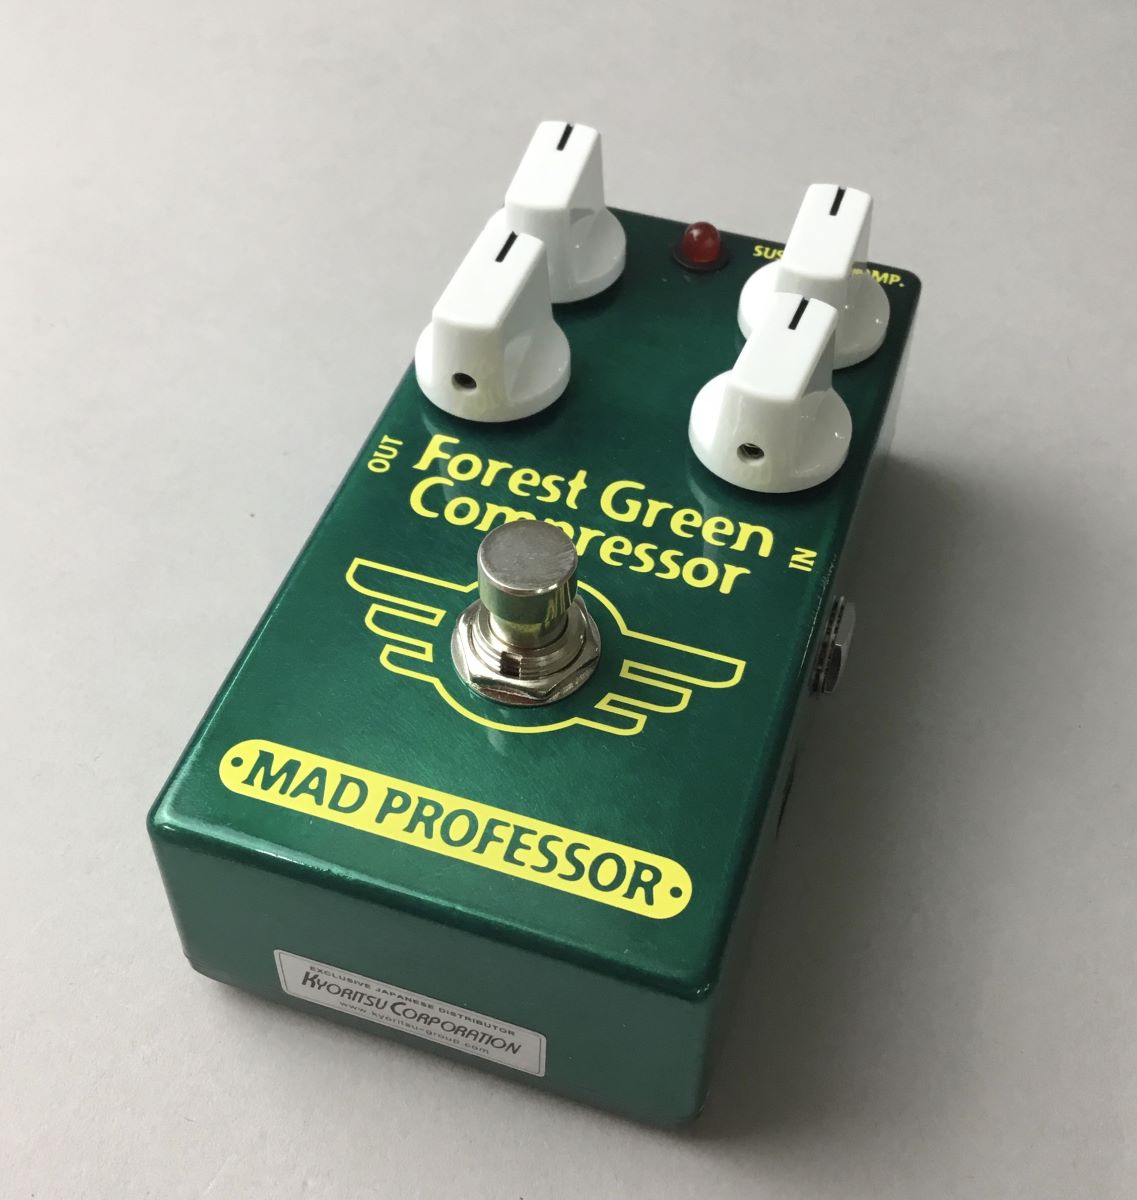 Mad Professor New Forest Green Compressor コンパクトエフェクター 